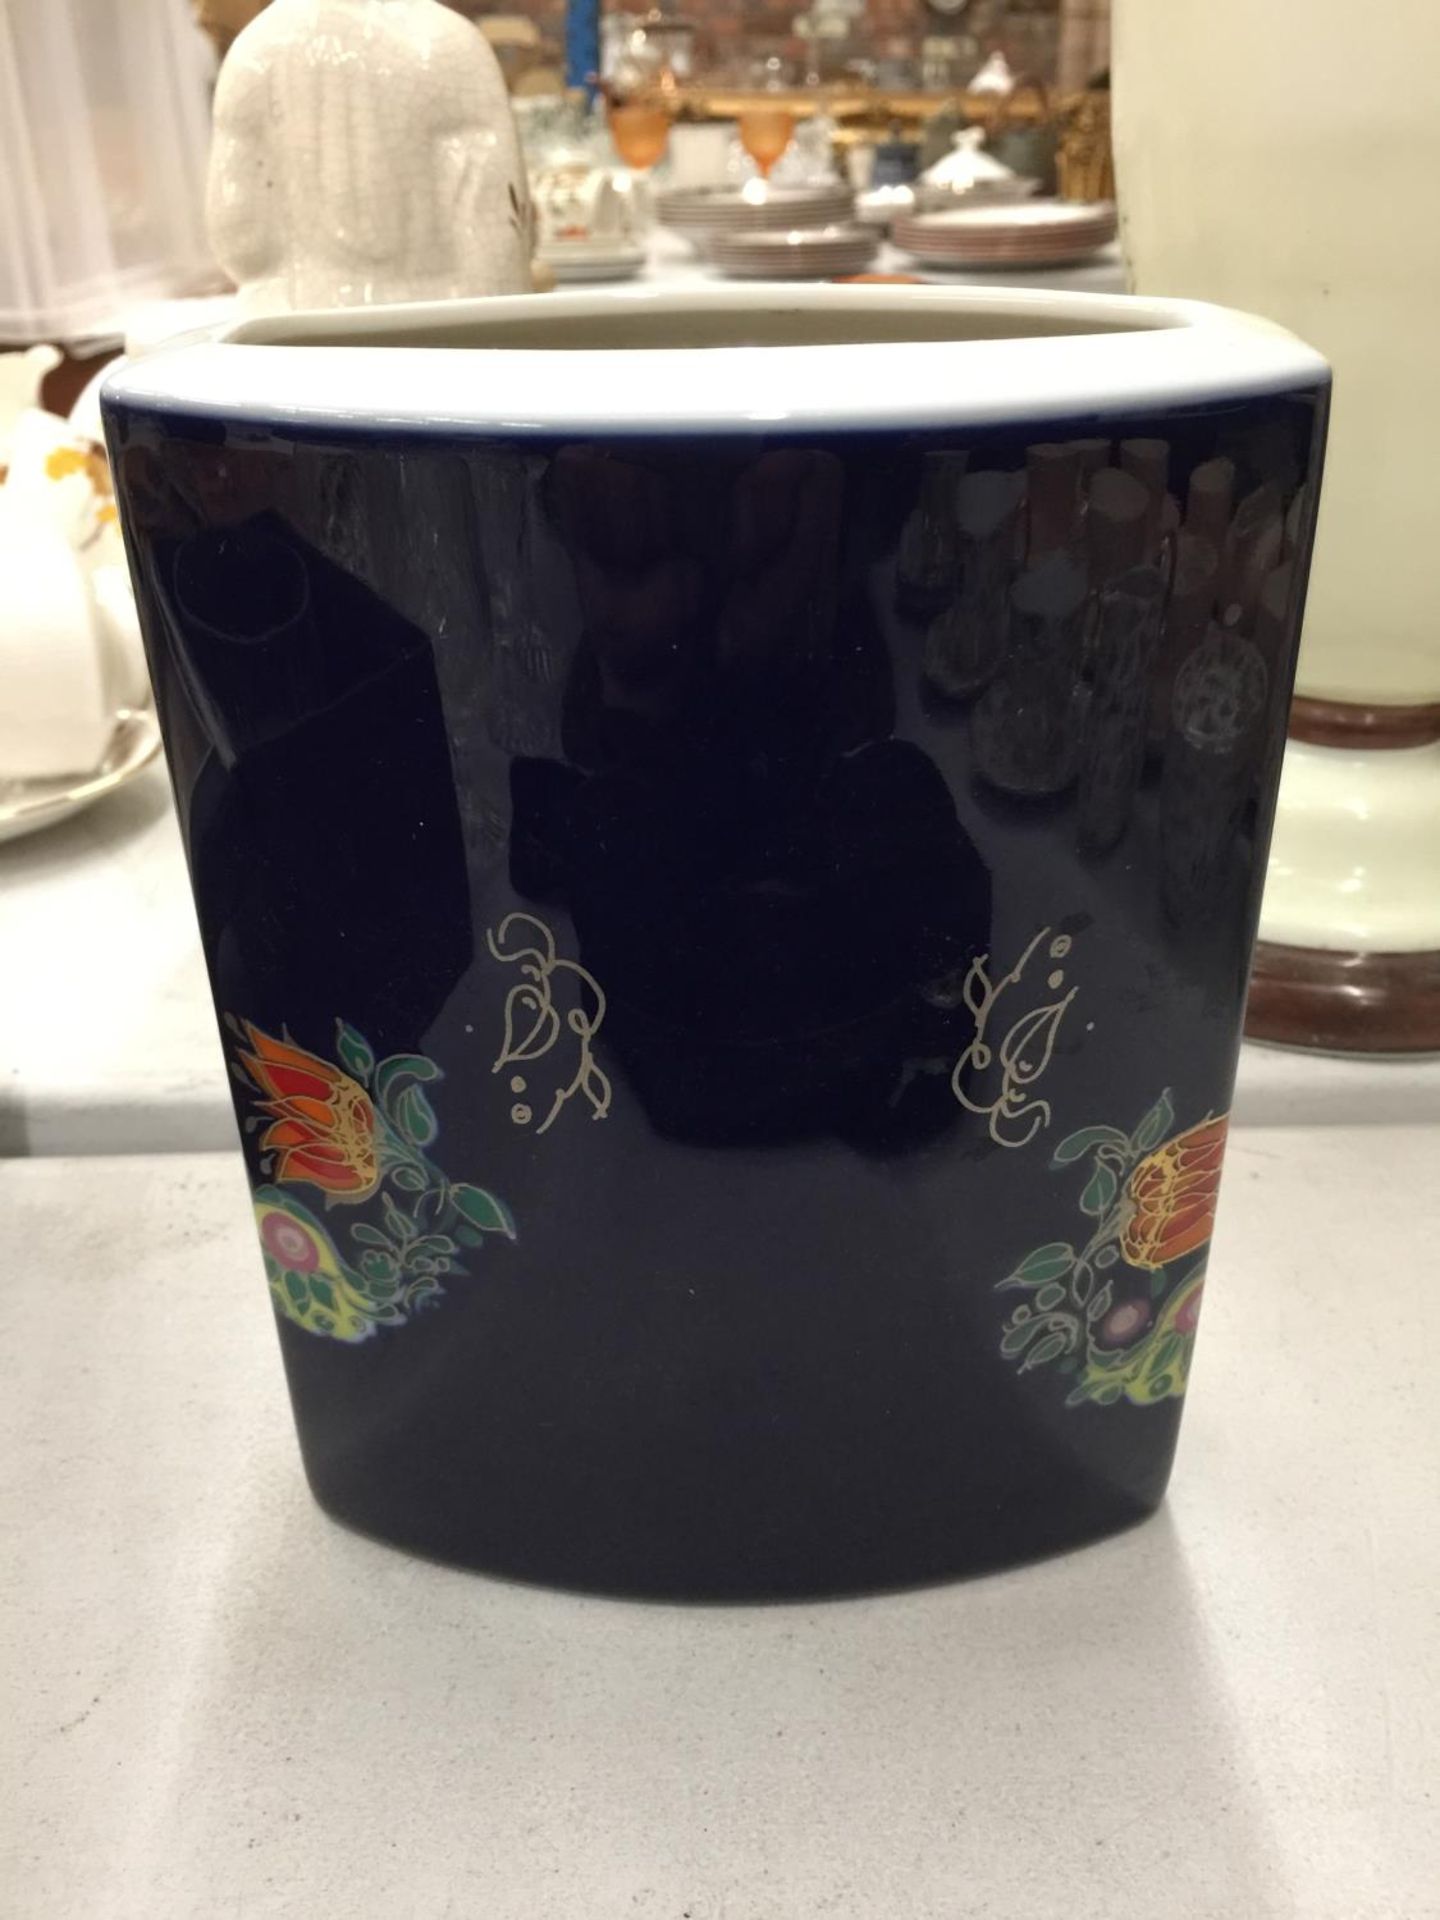 A ROSENTHAL, GERMANY RECTANGULAR VASE IN A DEEP BLUE WITH ENAMELLED LADY FIGURE, SIGNED TO THE FRONT - Image 2 of 4